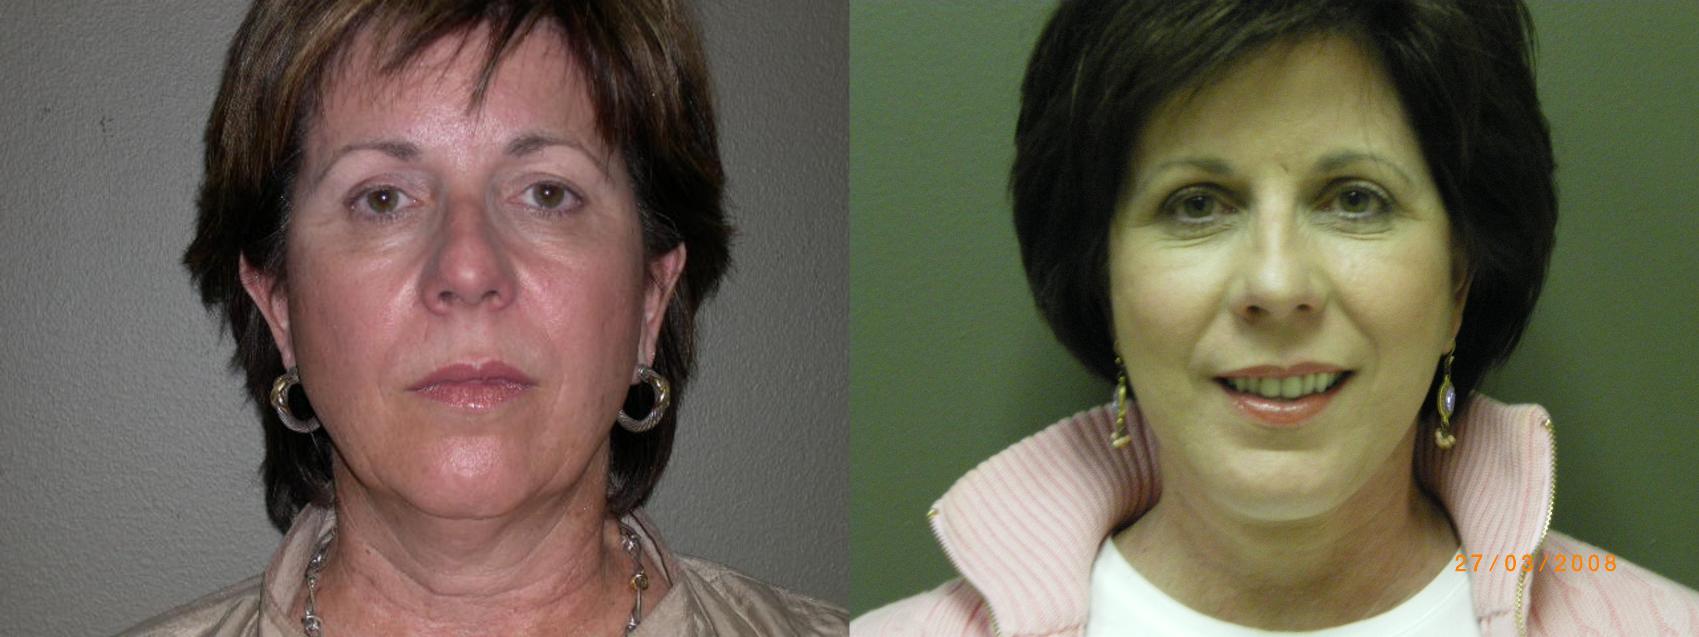 Facelift Before & After Photo | Marietta, GA | Plastic Surgery Center of the South